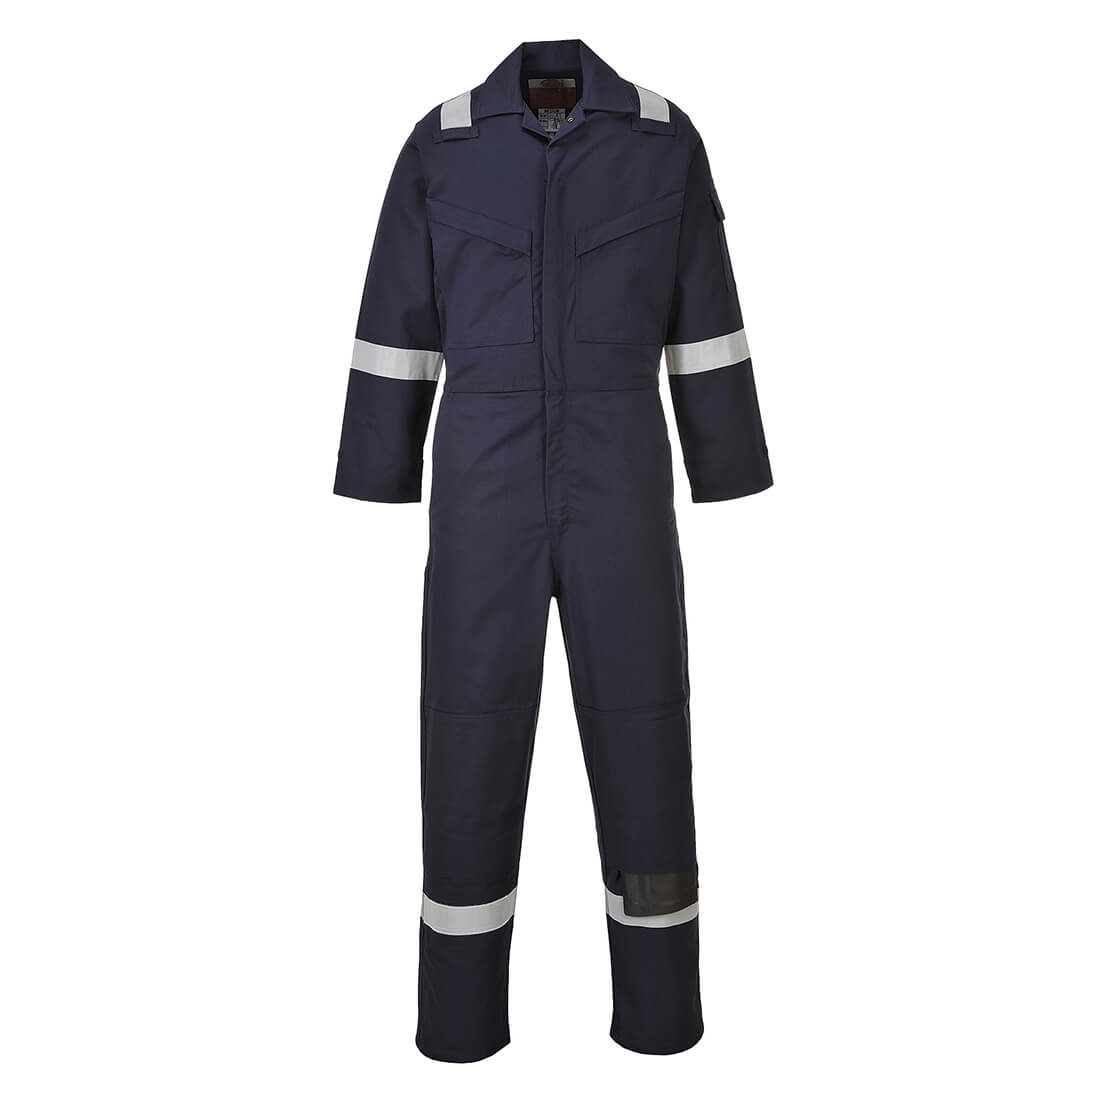 Image of Biz Flame Mens Aberdeen Flame Resistant Antistatic Coverall Navy Blue 3XL 32"